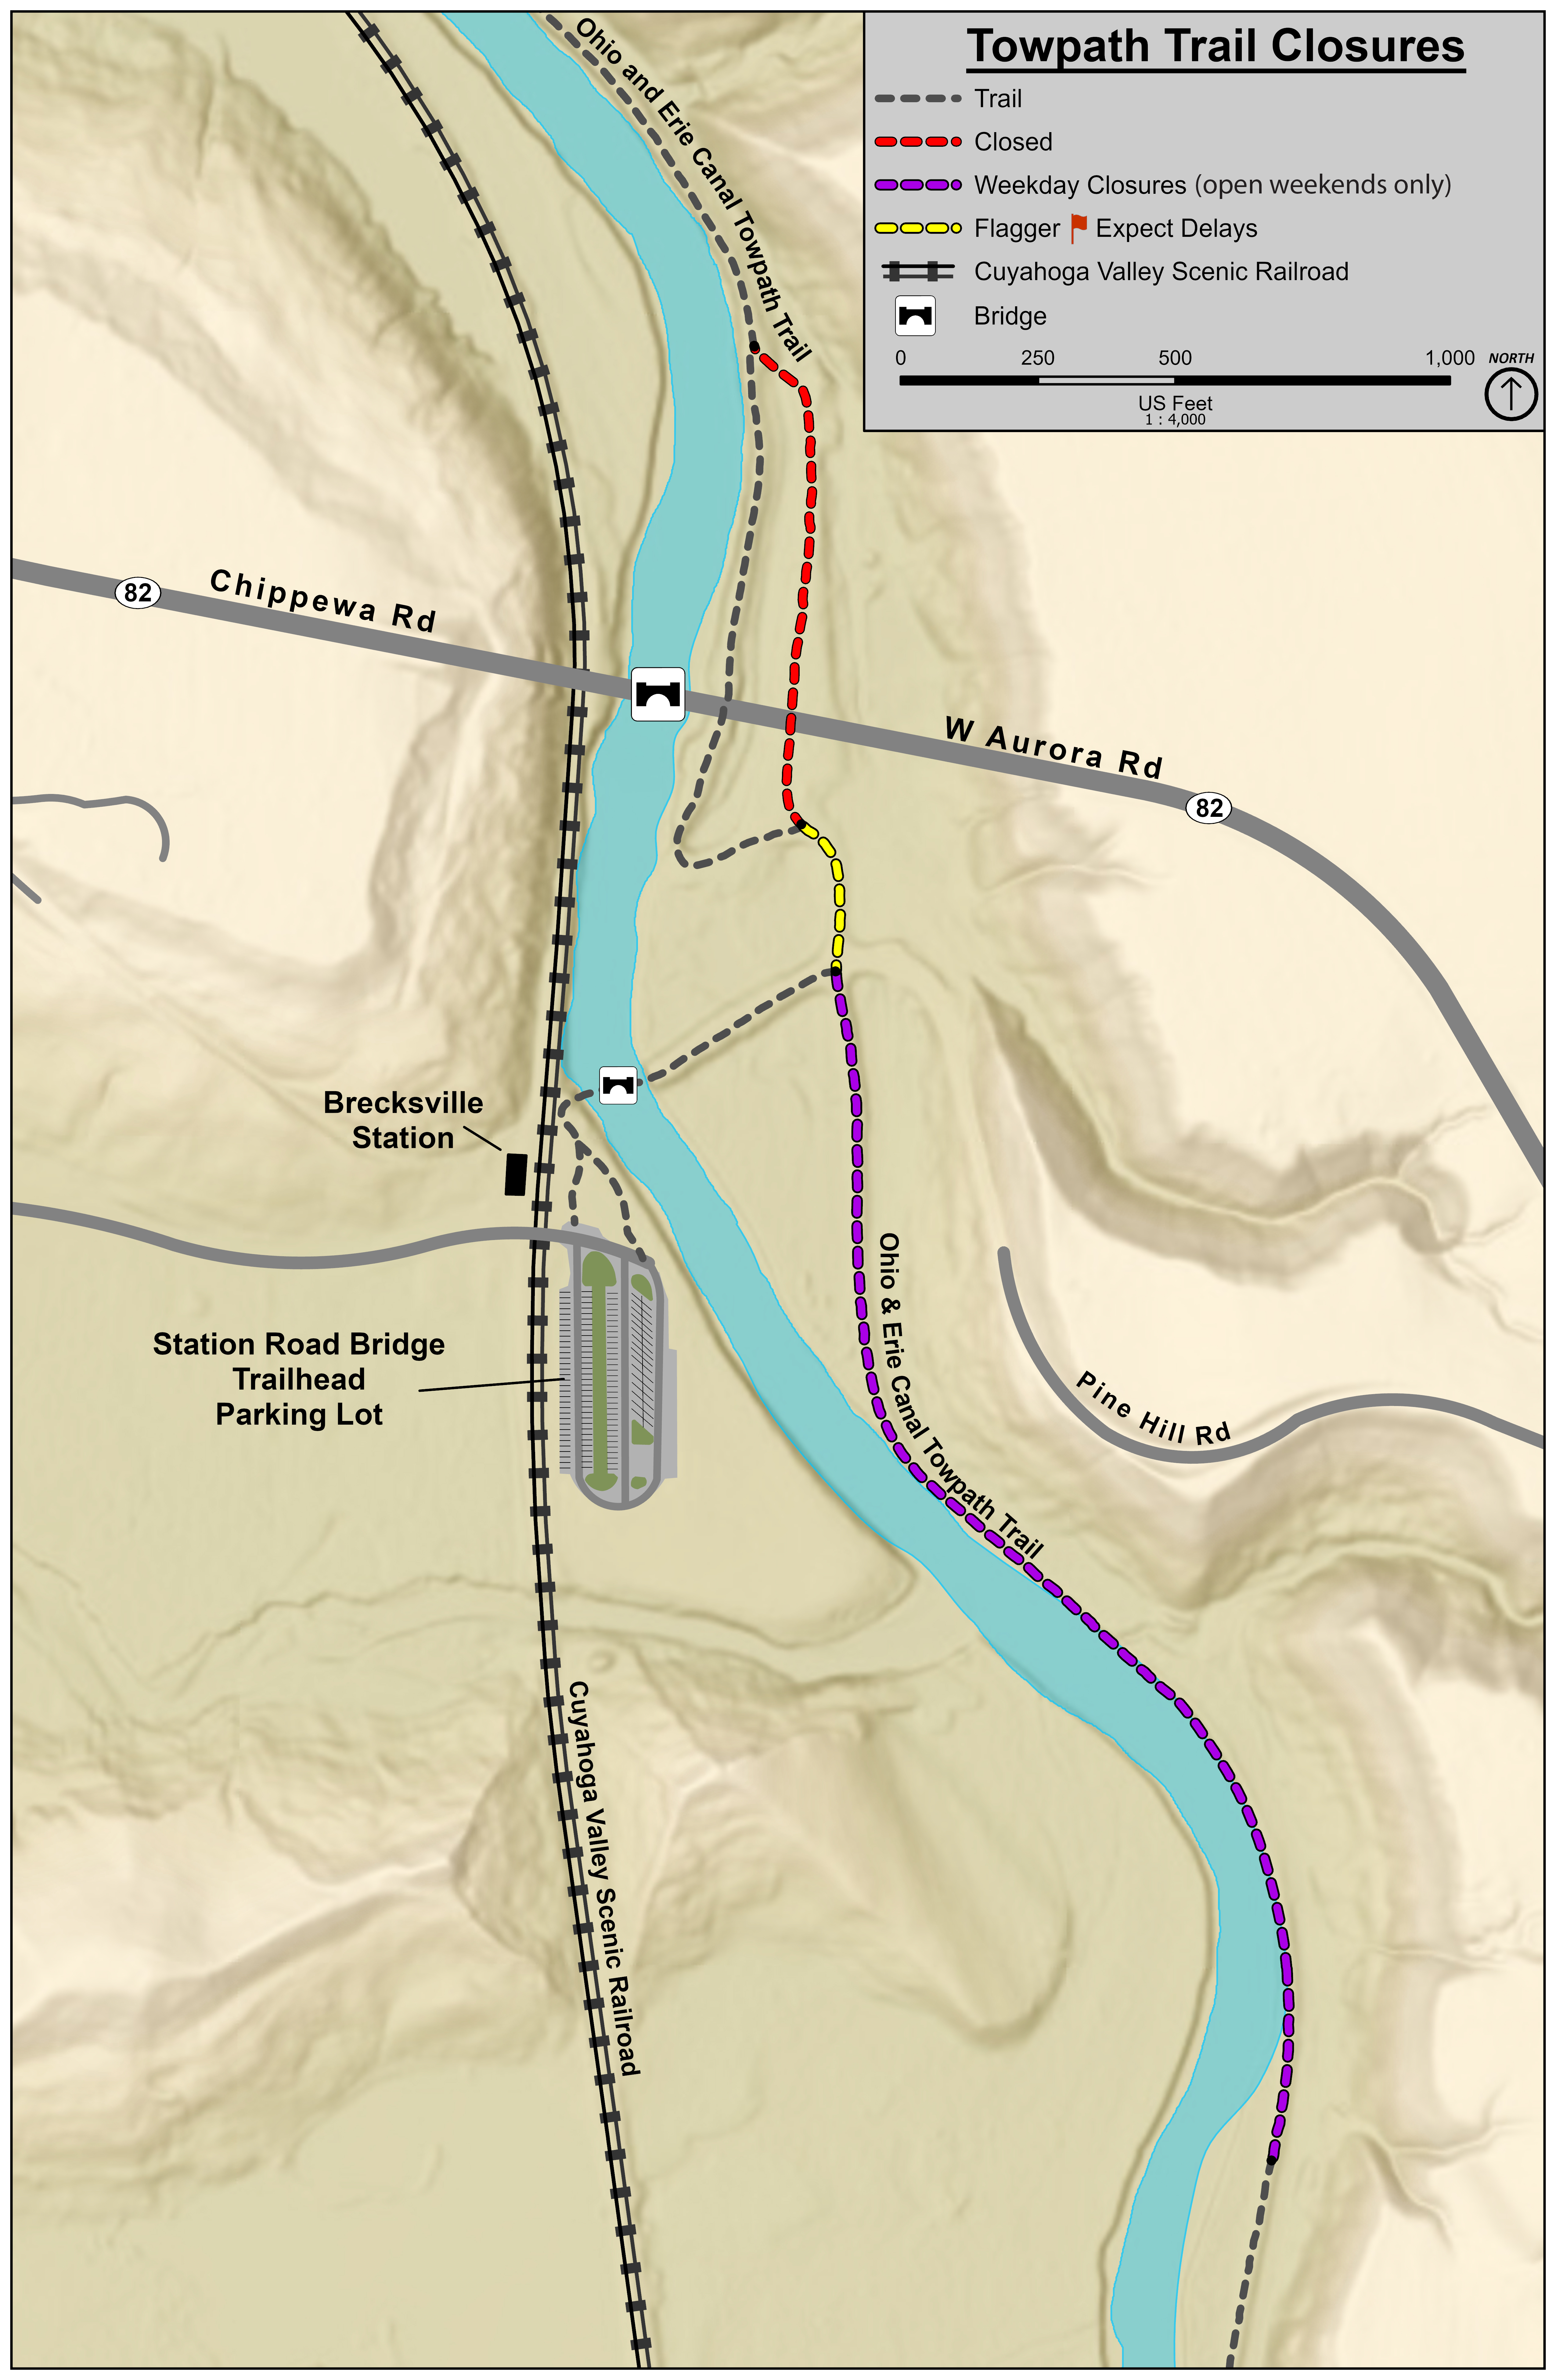 A map of the Station Road Bridge area showing the parking lot, bridge, river, railroad, and towpath with closed section highlighted.